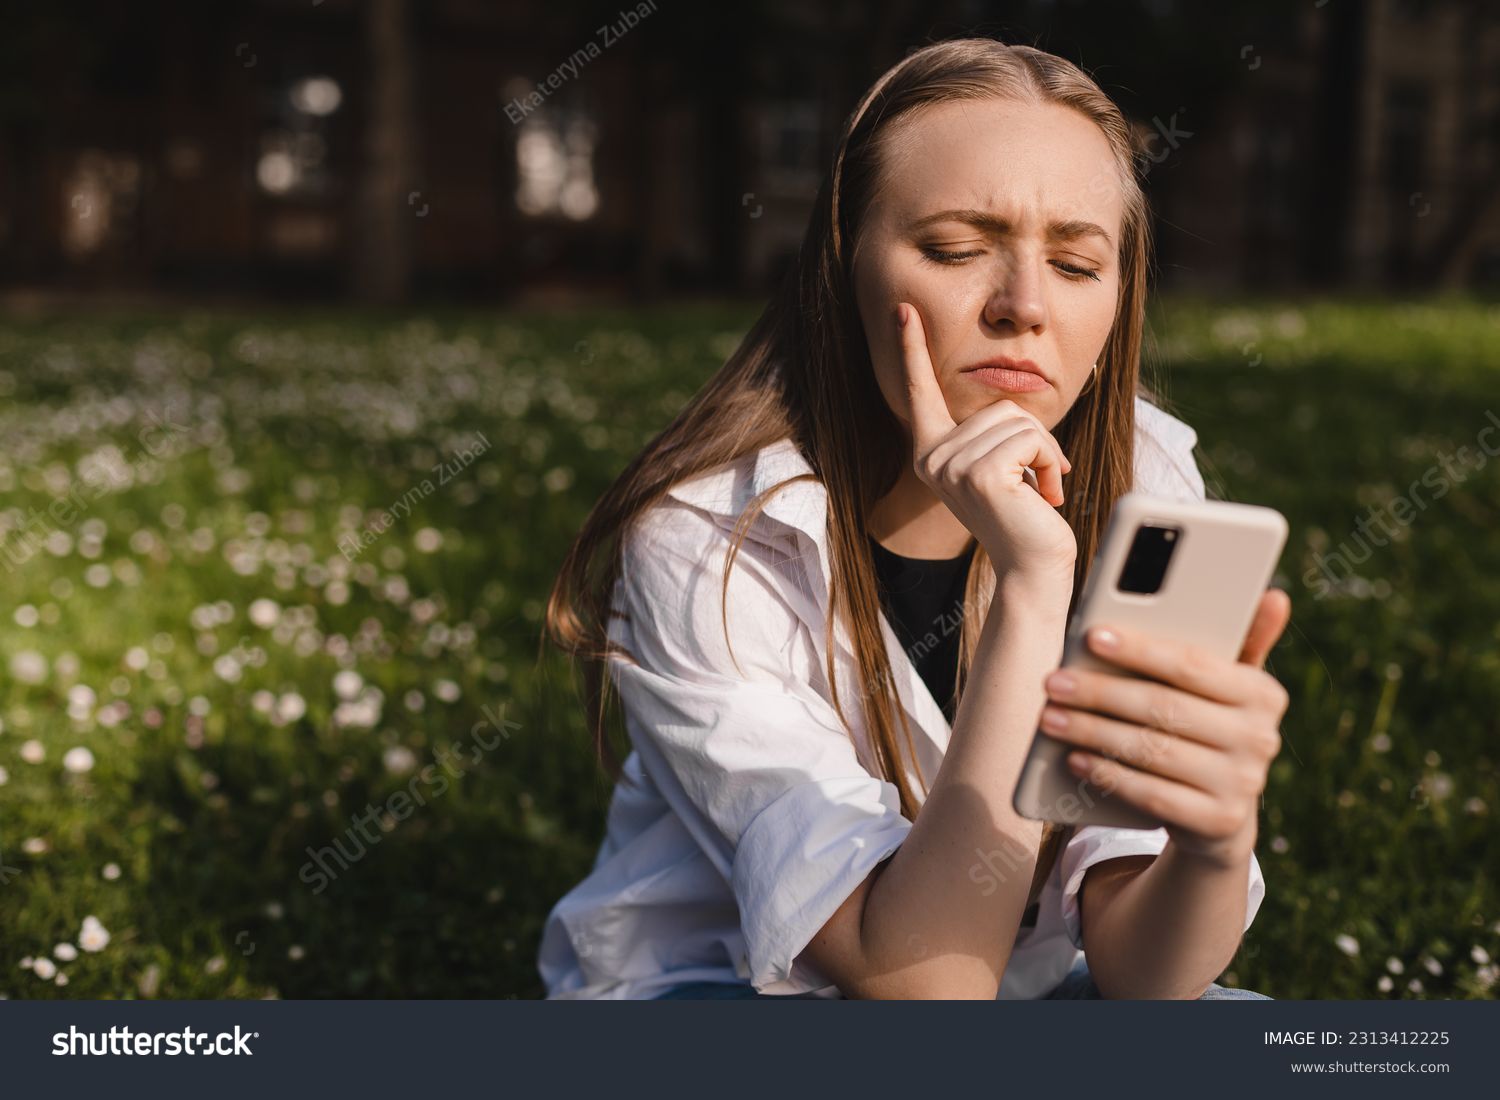 Woman holding a phone while holding her hand on chin. Expressive student thinking outside in campus - Woman in doubt with smartphone in her palm, think about reading information, search solution. #2313412225